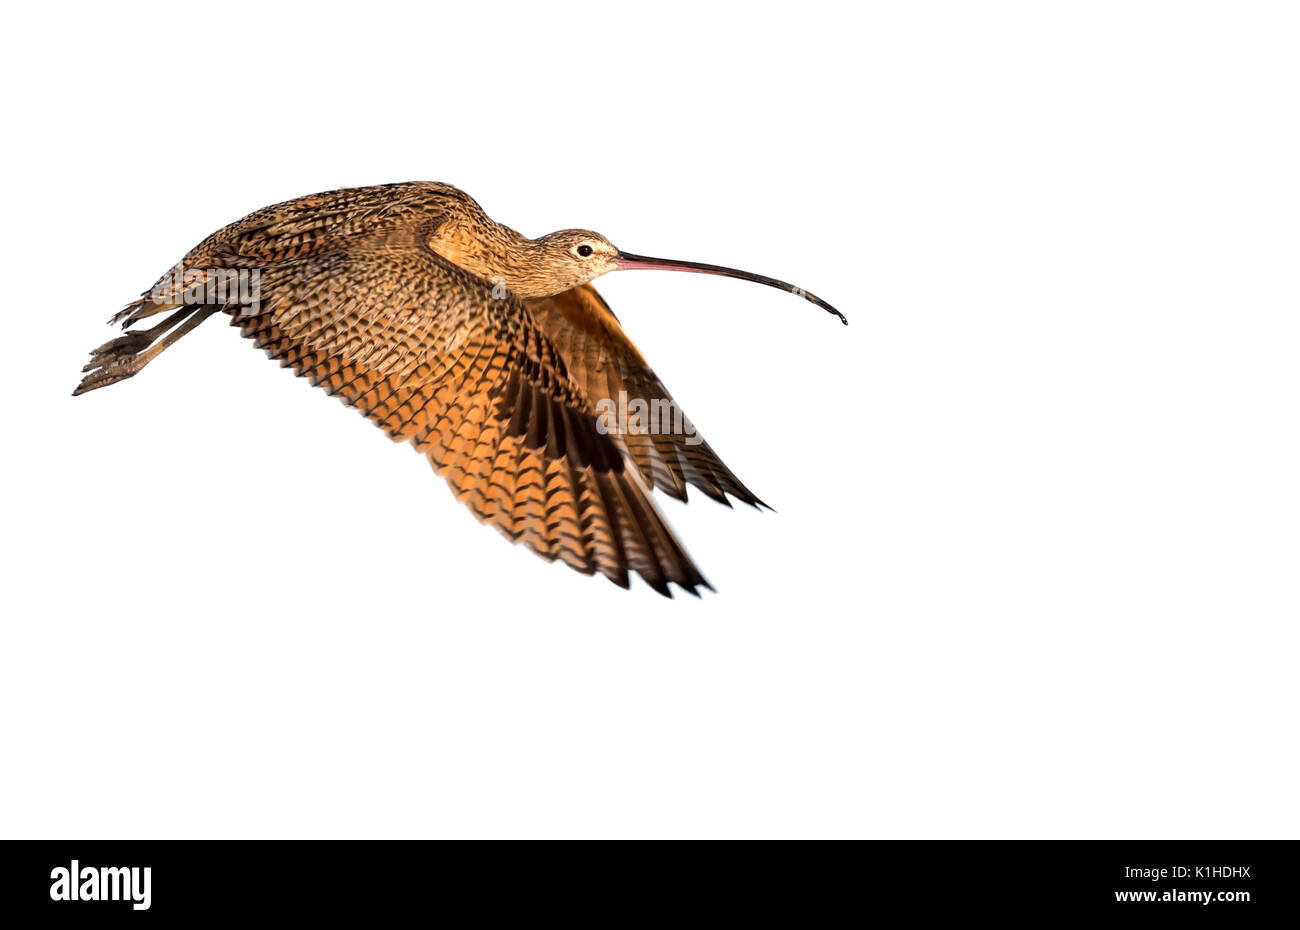 Long-billed curlew (Numenius americanus) flying, isolated on white background. Stock Photo